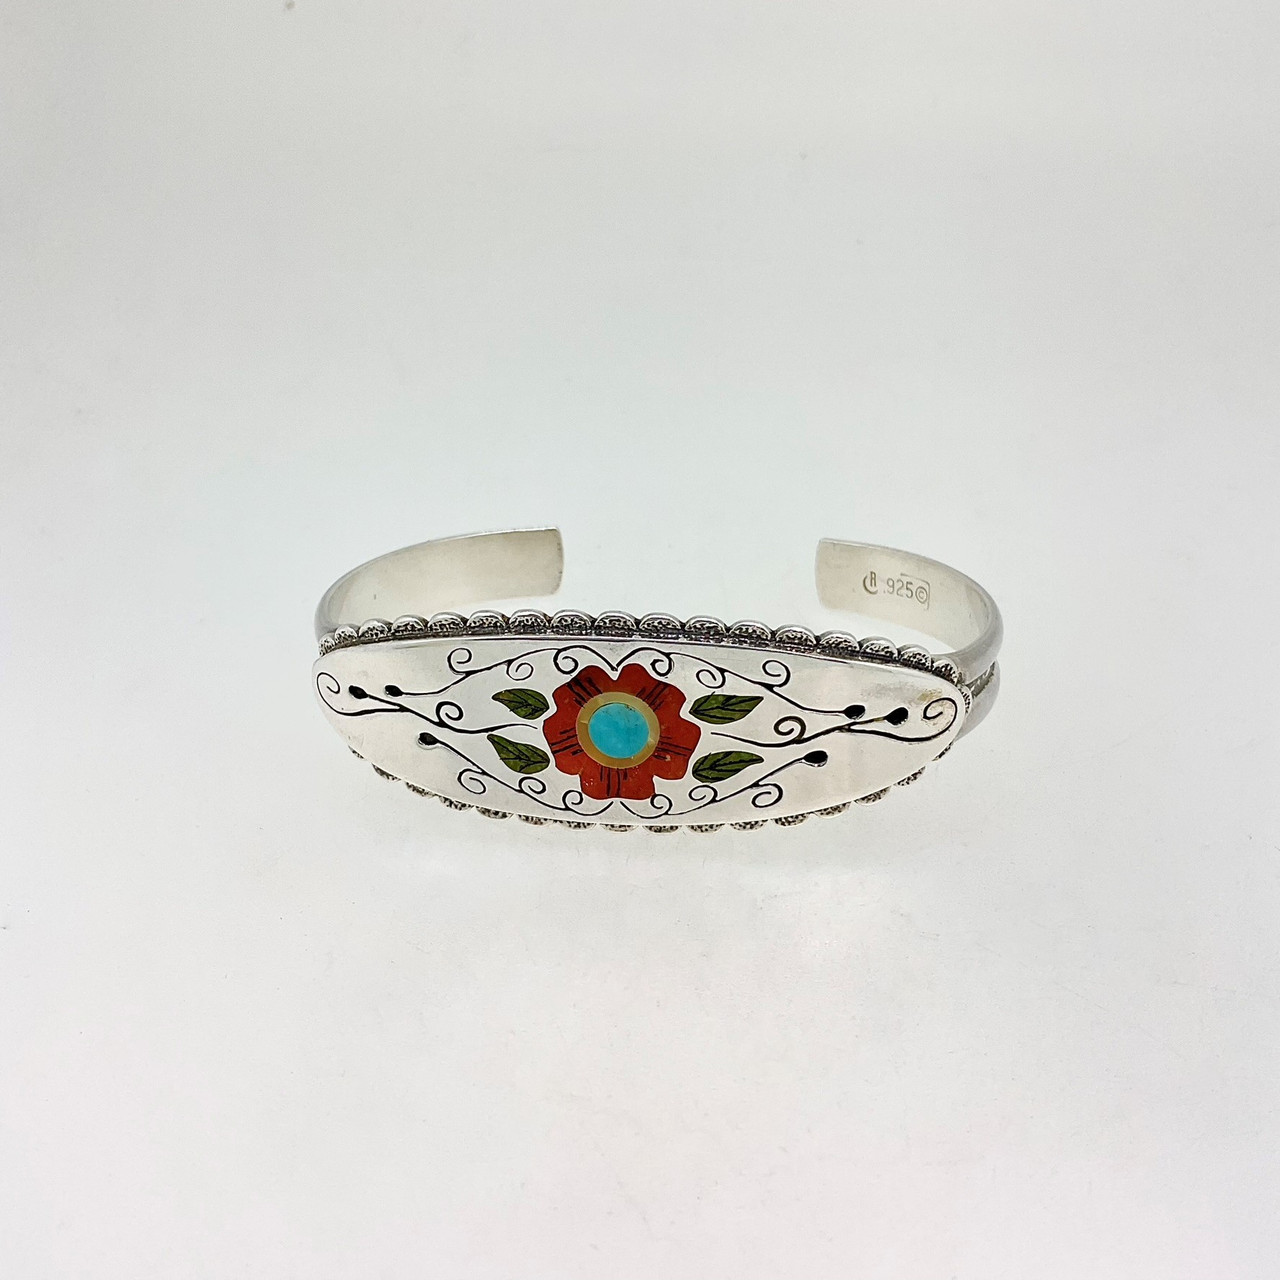 Zuni Carolyn Pollack Relios + RN Laconsello Sterling Silver Flower  Turquoise Coral MOP Inlay Bracelet Cuff